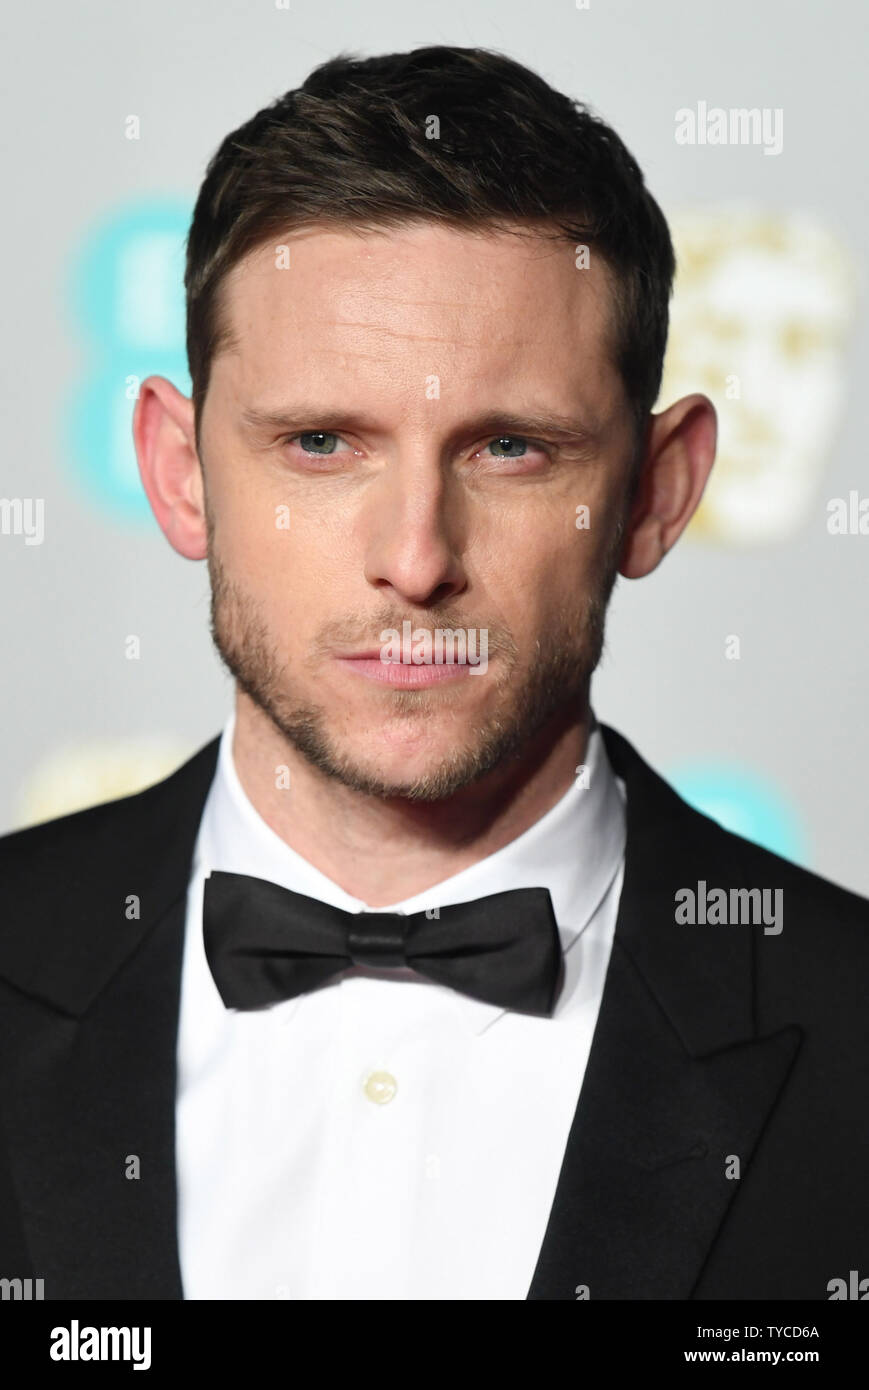 British actor Jamie Bell attends the red carpet arrivals at the British Academy Film Awards at the Royal Albert Hall in London on February 10, 2019. Photo by Rune Hellestad/UPI Stock Photo